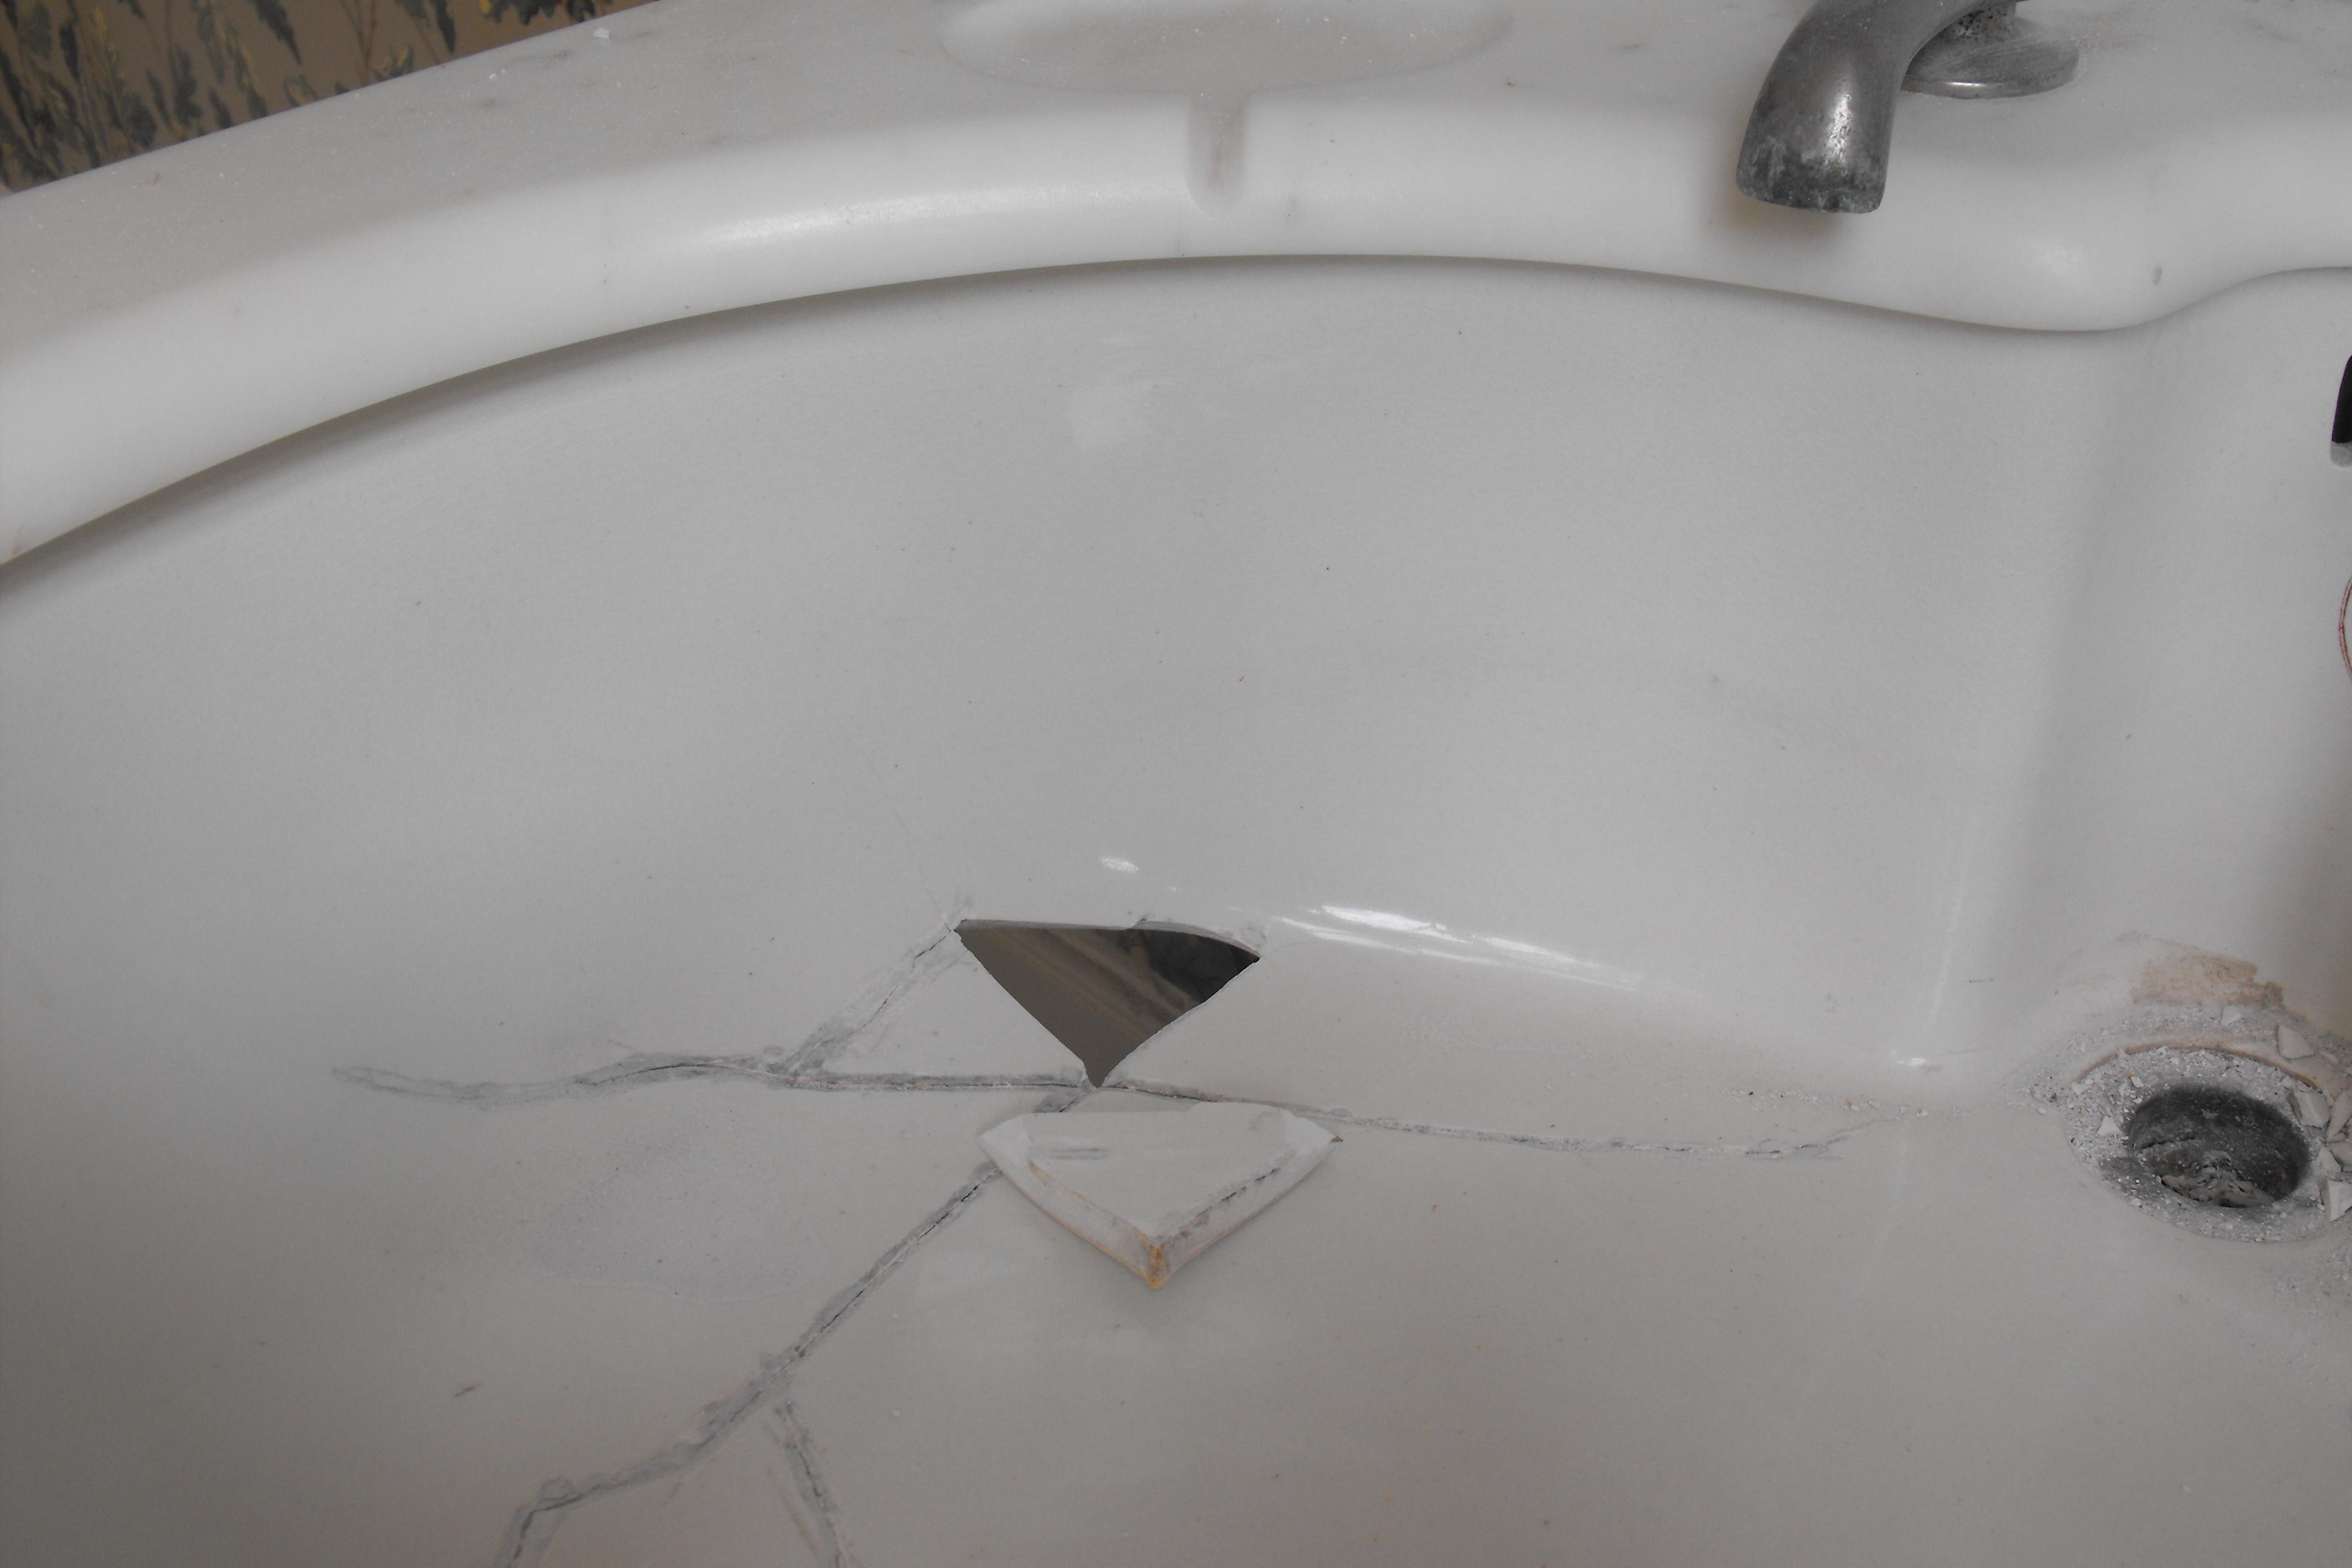 Category Repairing A Cracked Sink The Bath Businessthe